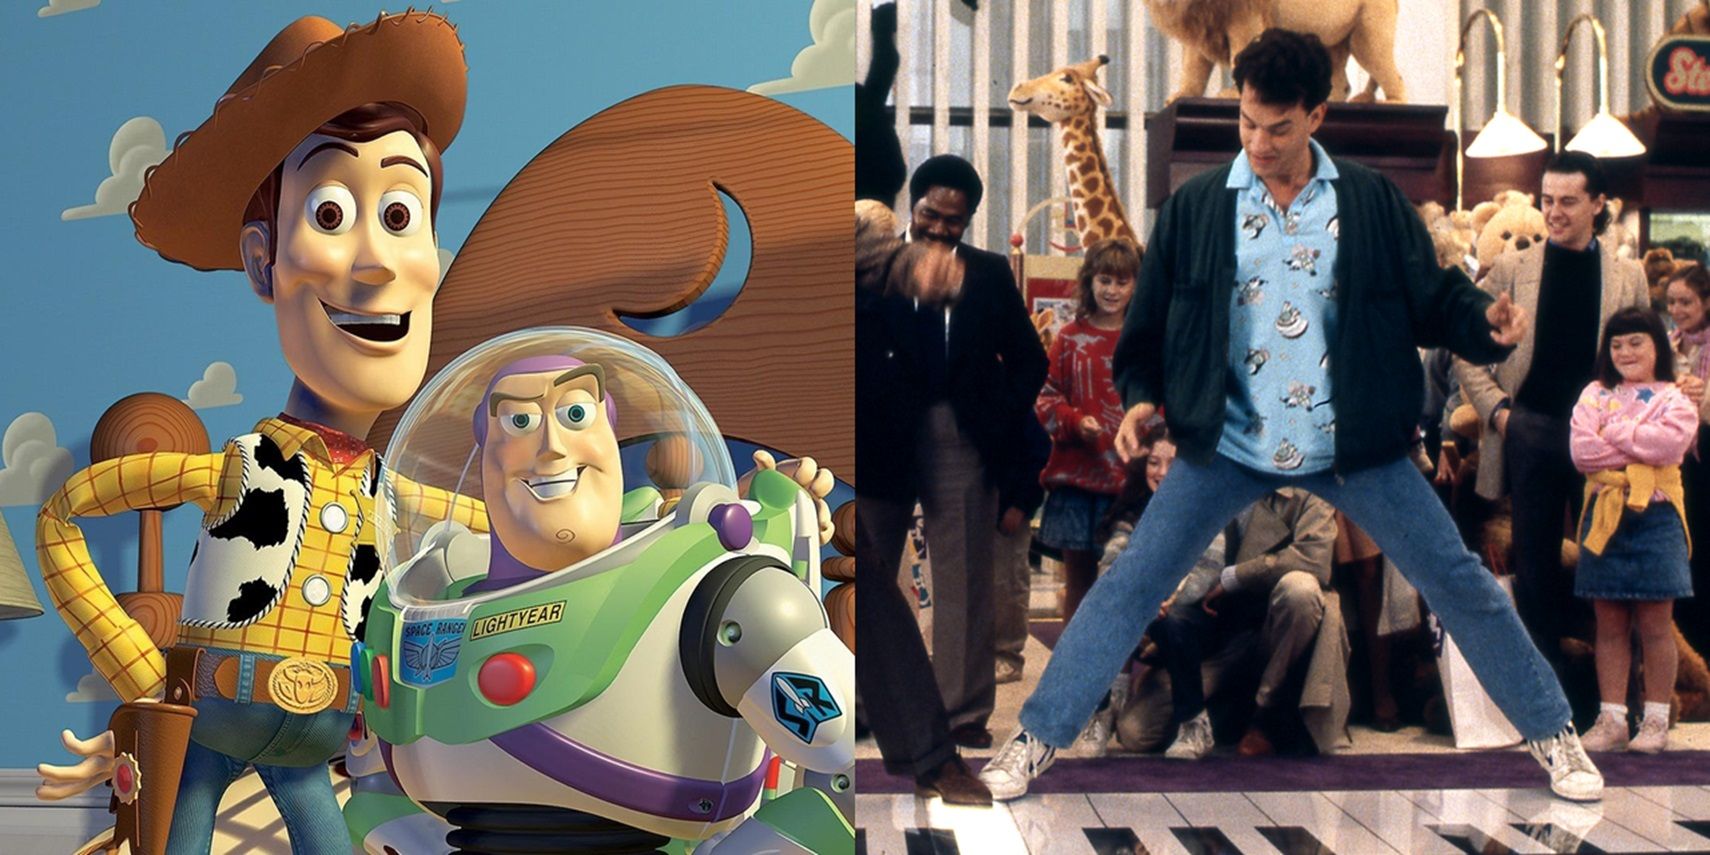 Split image of Woody and Buzz in Toy Story and Tom Hanks playing a floor piano in Big